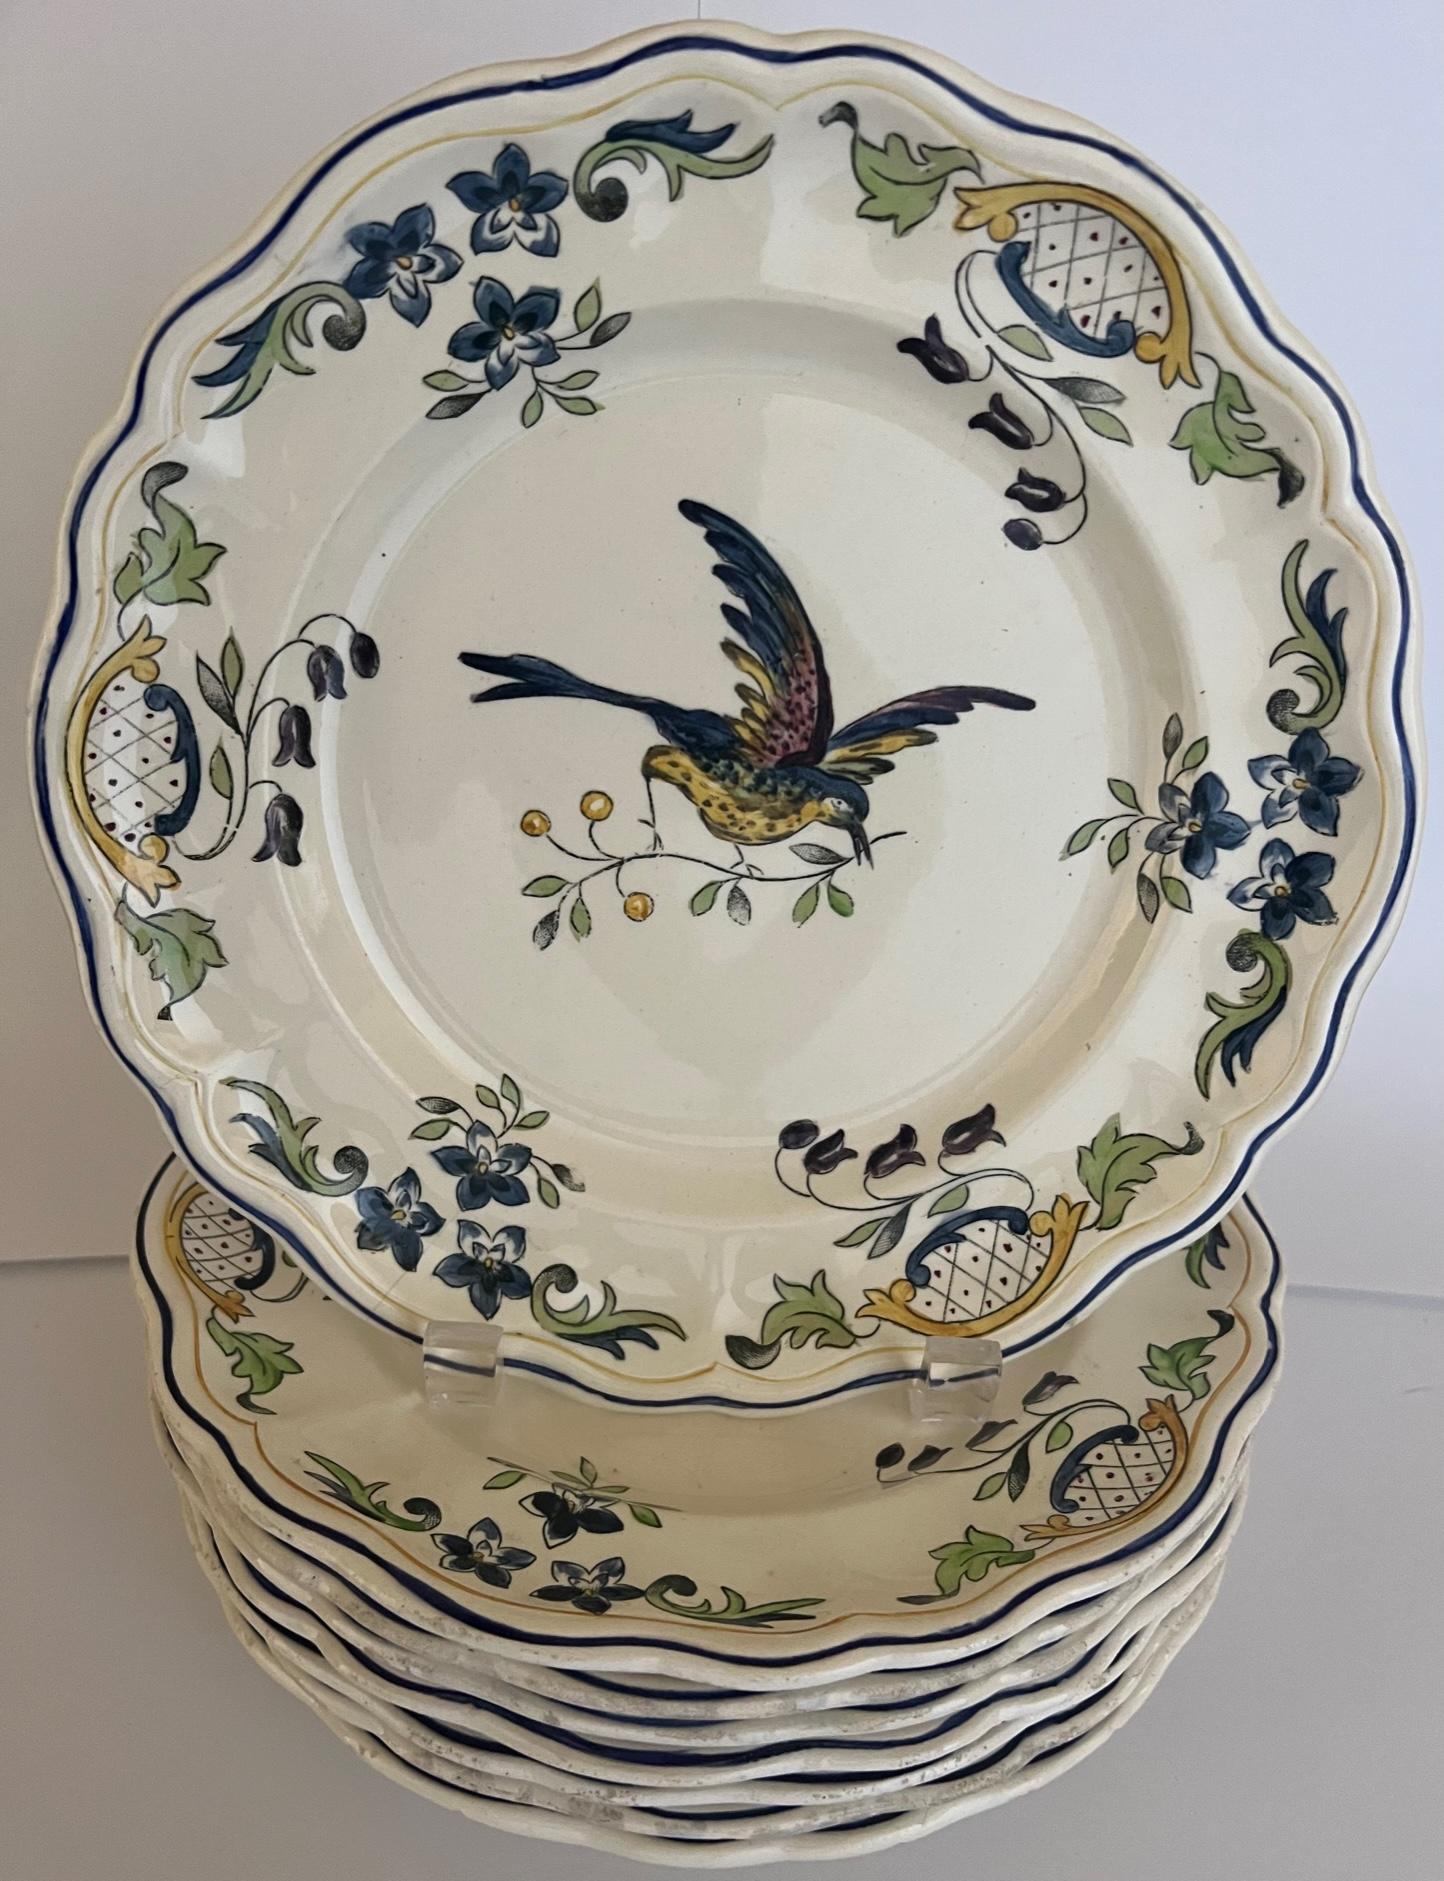 French faience plate set hand painted with birds and flowers, made in the 1930's in France by Longchamp. They are hand painted so all slightly different, all stamped Clery Longchamp France